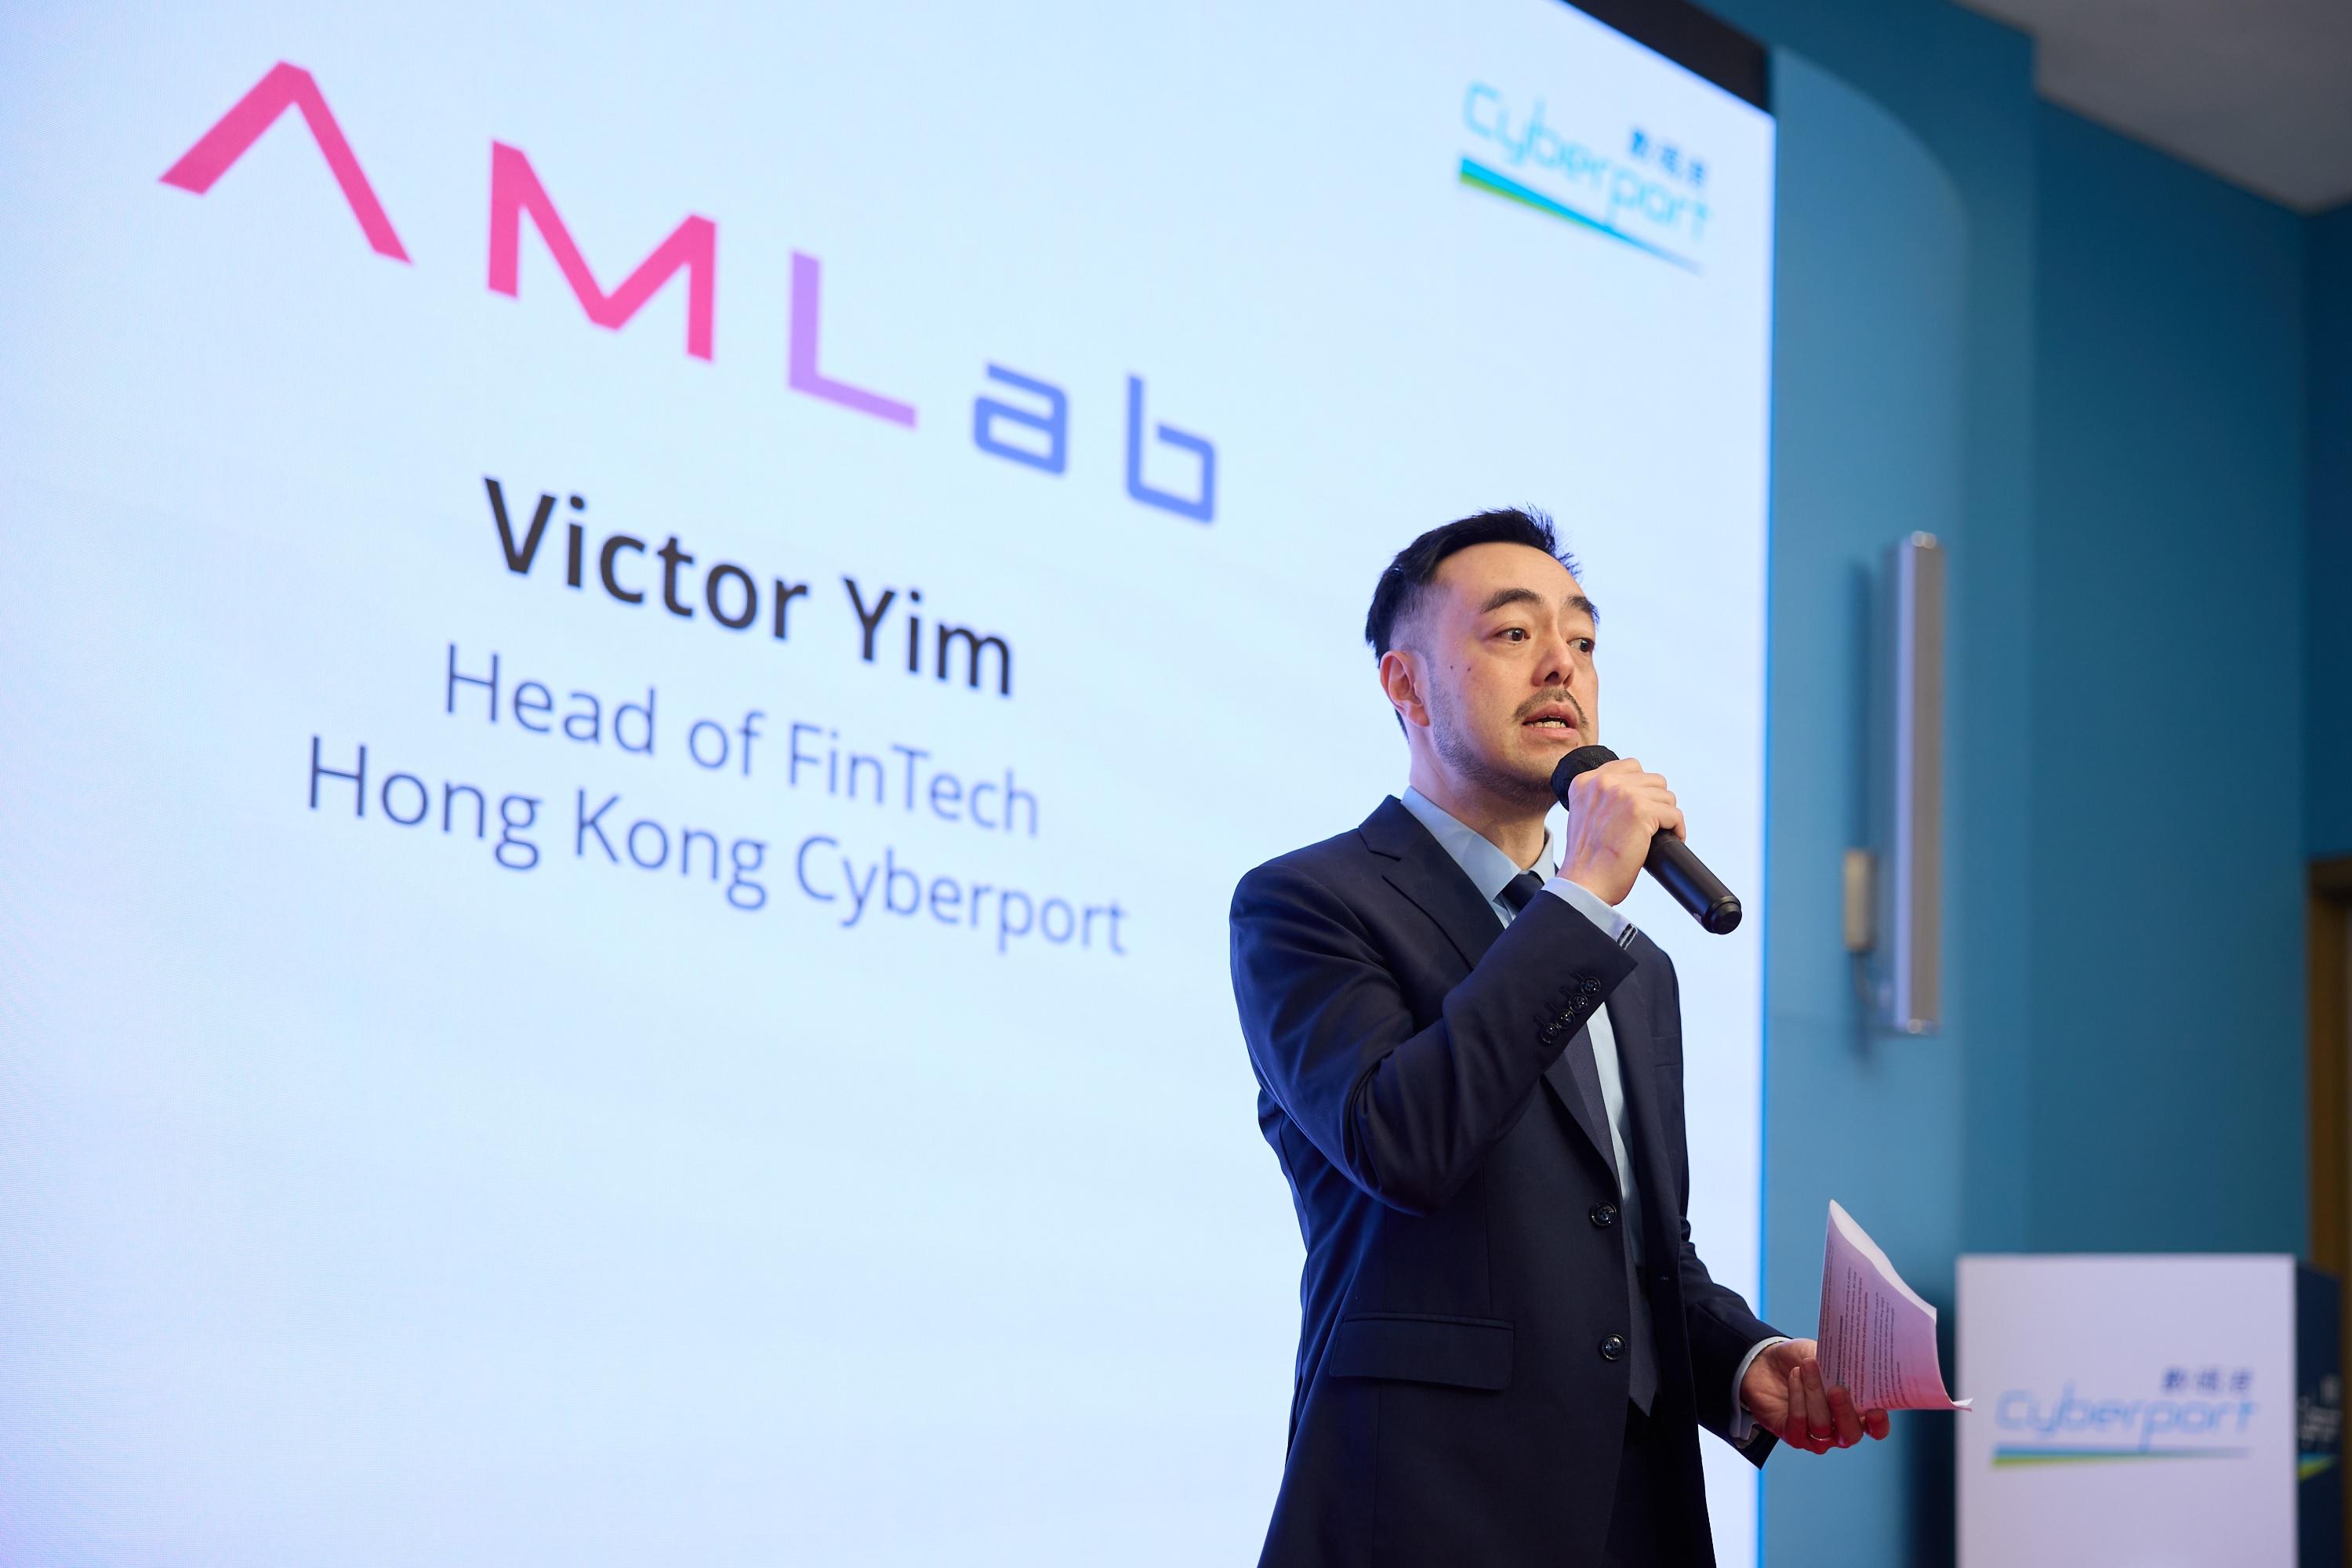 The Hong Kong Monetary Authority and Cyberport co-hosted the fourth Anti-Money Laundering Regtech Lab (AMLab 4) today (June 7), with support from Deloitte. Photo shows the Head of FinTech of the Cyberport, Mr Victor Yim, delivering remarks at AMLab 4.